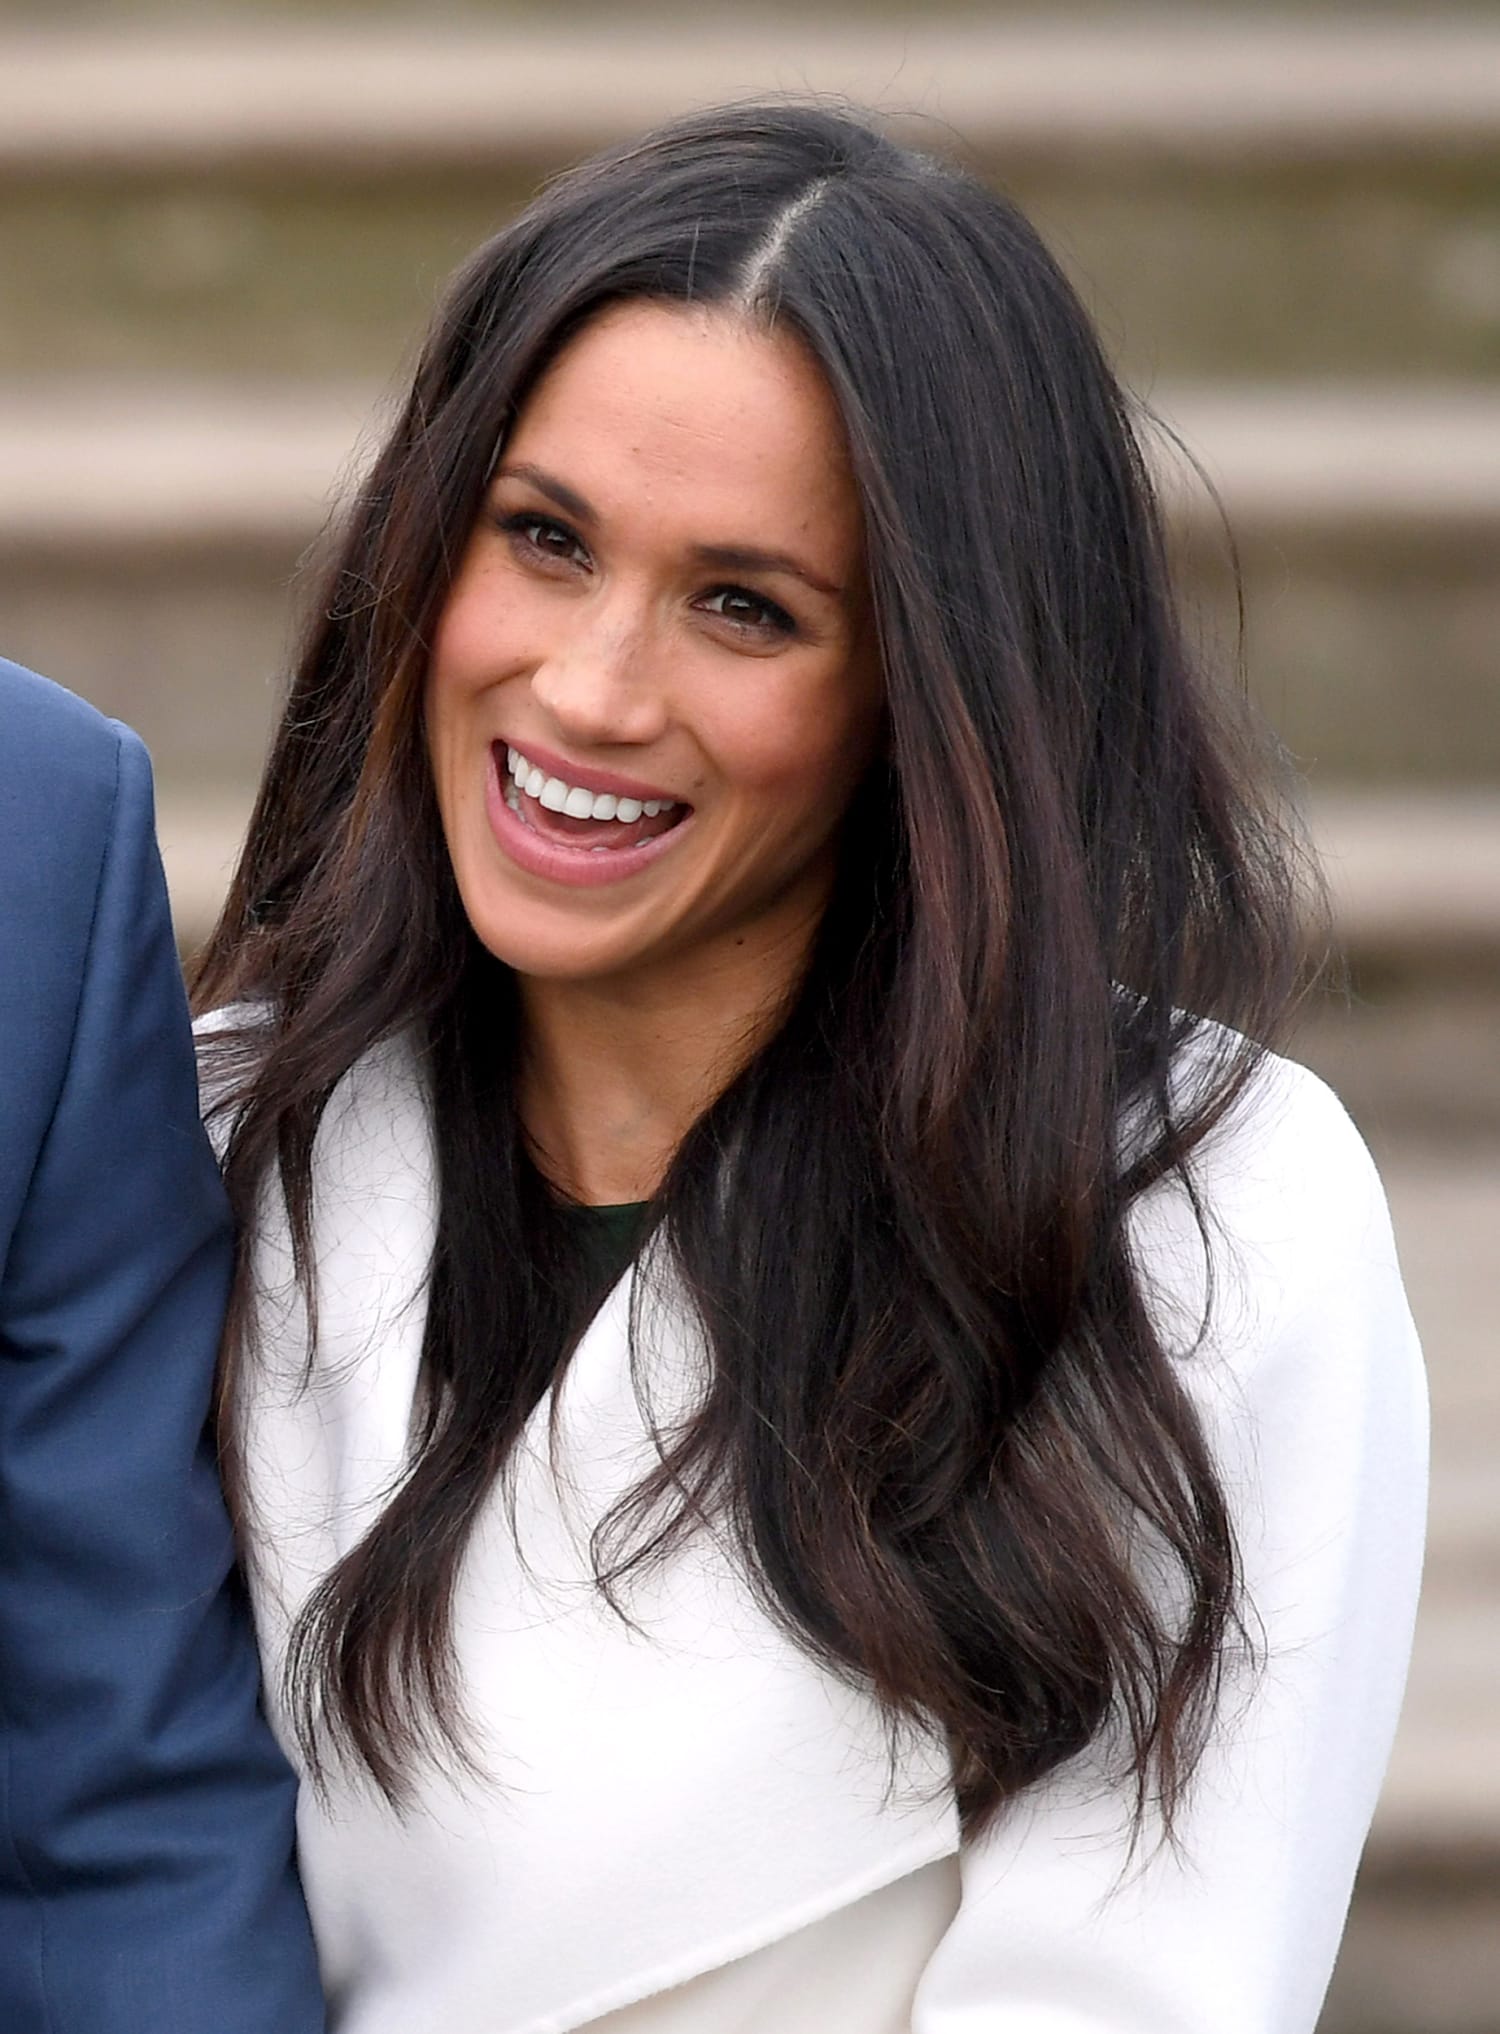 Did Meghan Markle just get a new layered haircut?